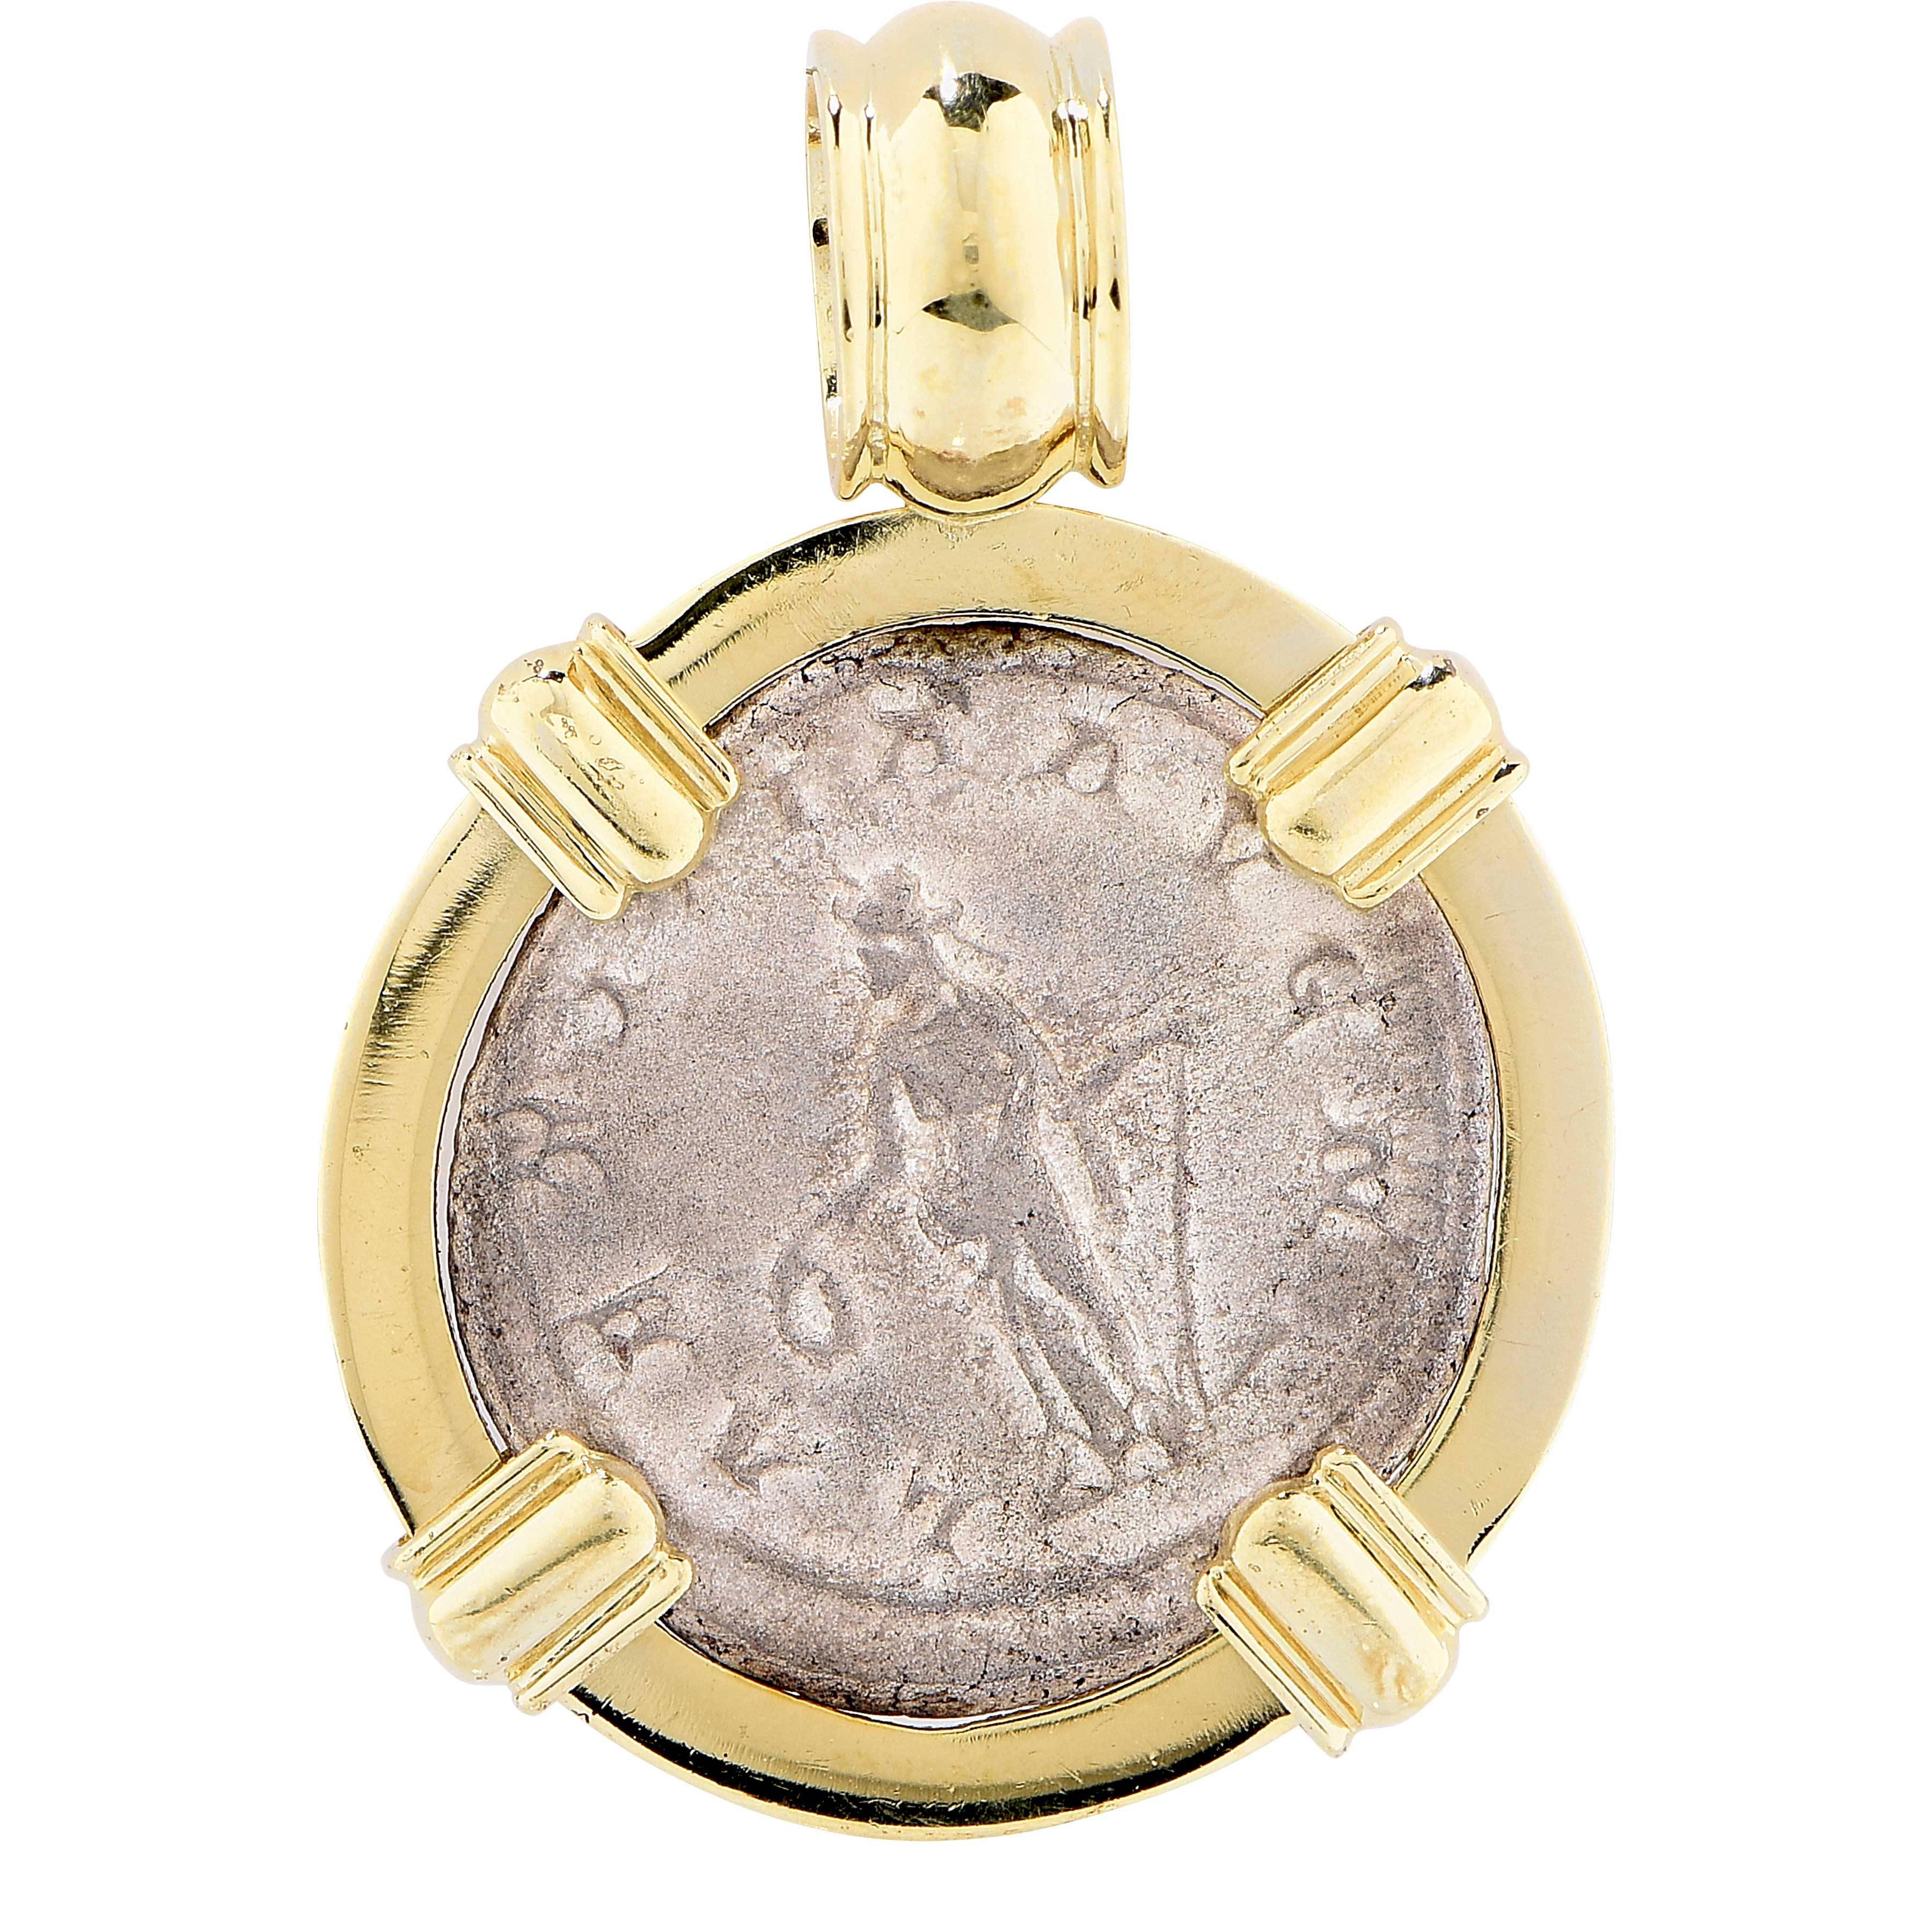 Greek Coin Pendant with Emeralds and Diamonds

Metal Weight: 12.36 Grams